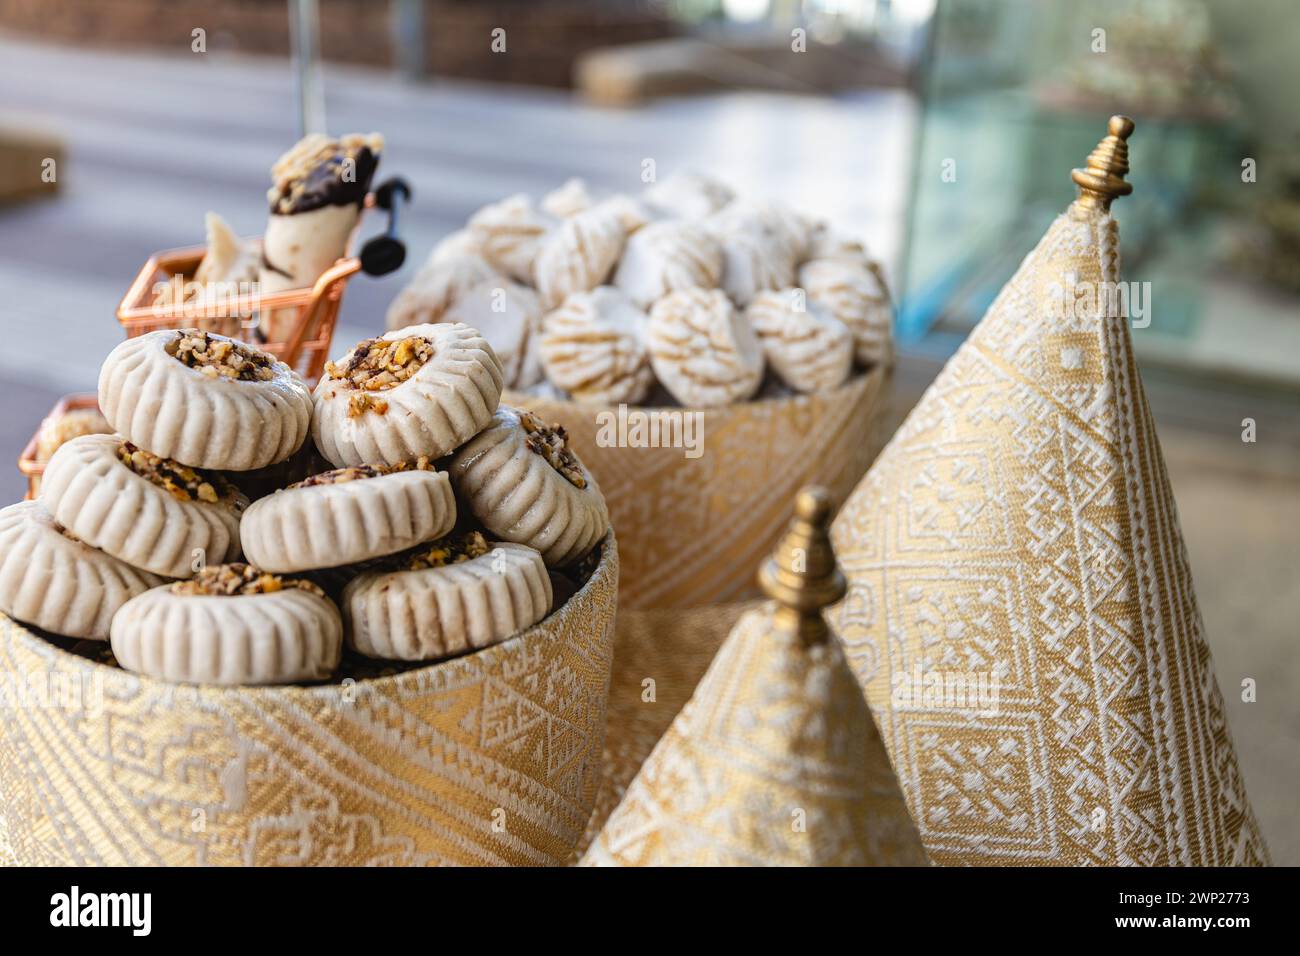 Horizontal photo a selective focus shot captures the intricate detail of artisanal Arabic pastries arrayed on a stand wrapped in traditional patterned Stock Photo